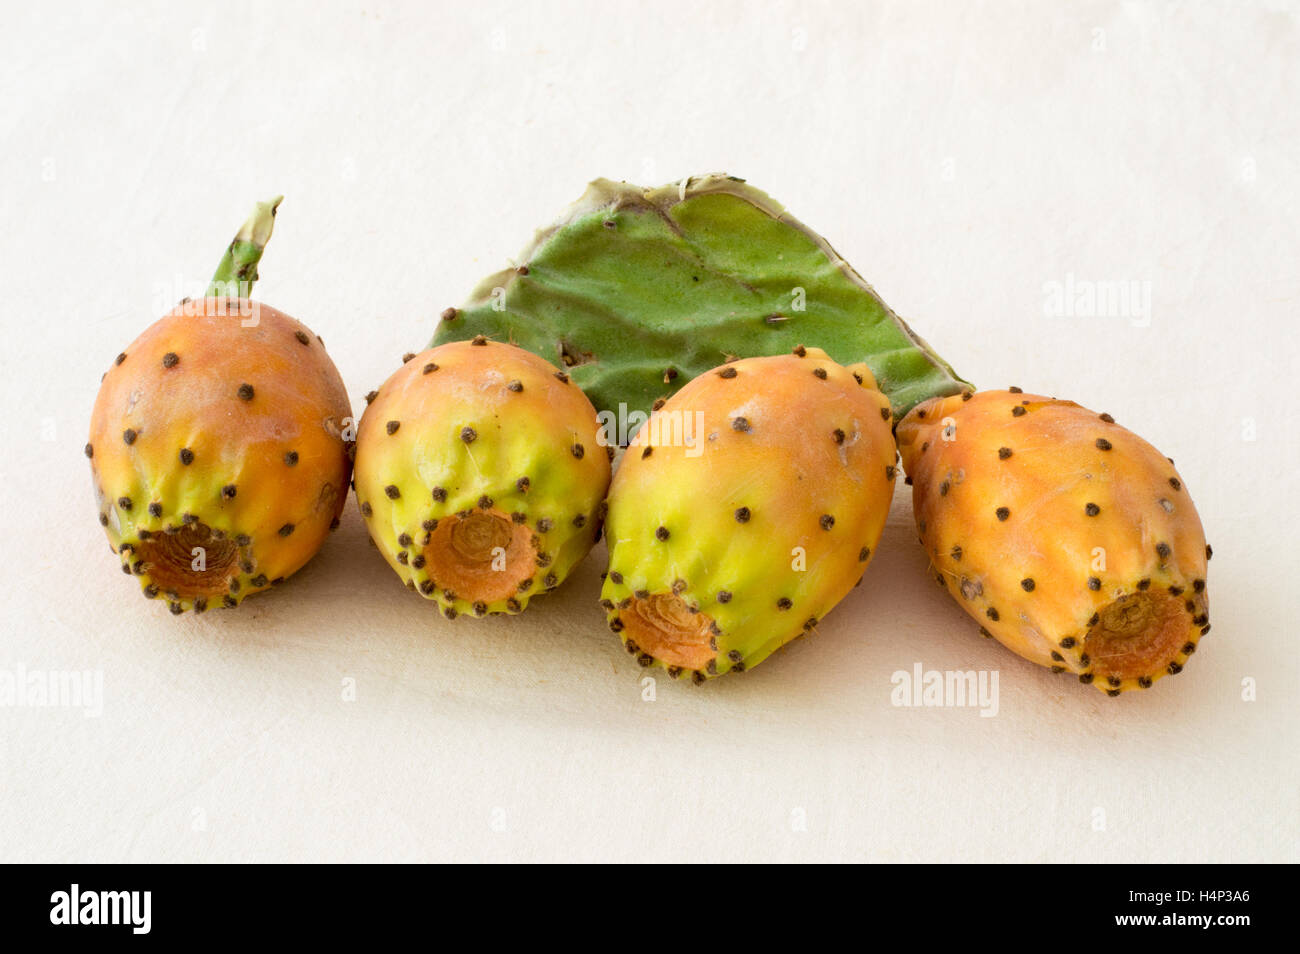 Prickly Pear Cactus Fruits on a White Background Stock Photo